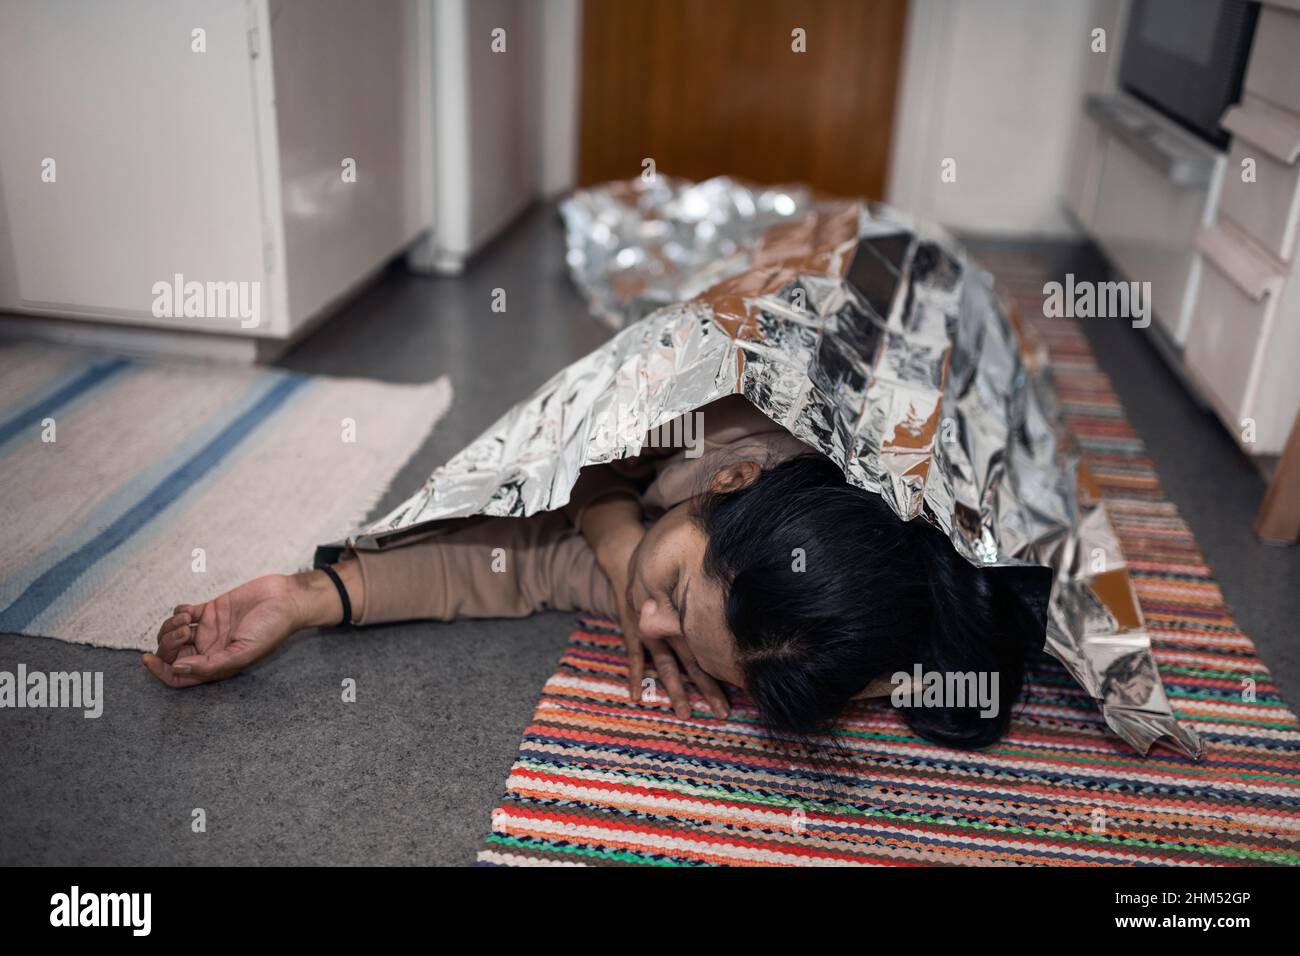 unconscious woman in medical shock lying under emergency blanket Stock Photo